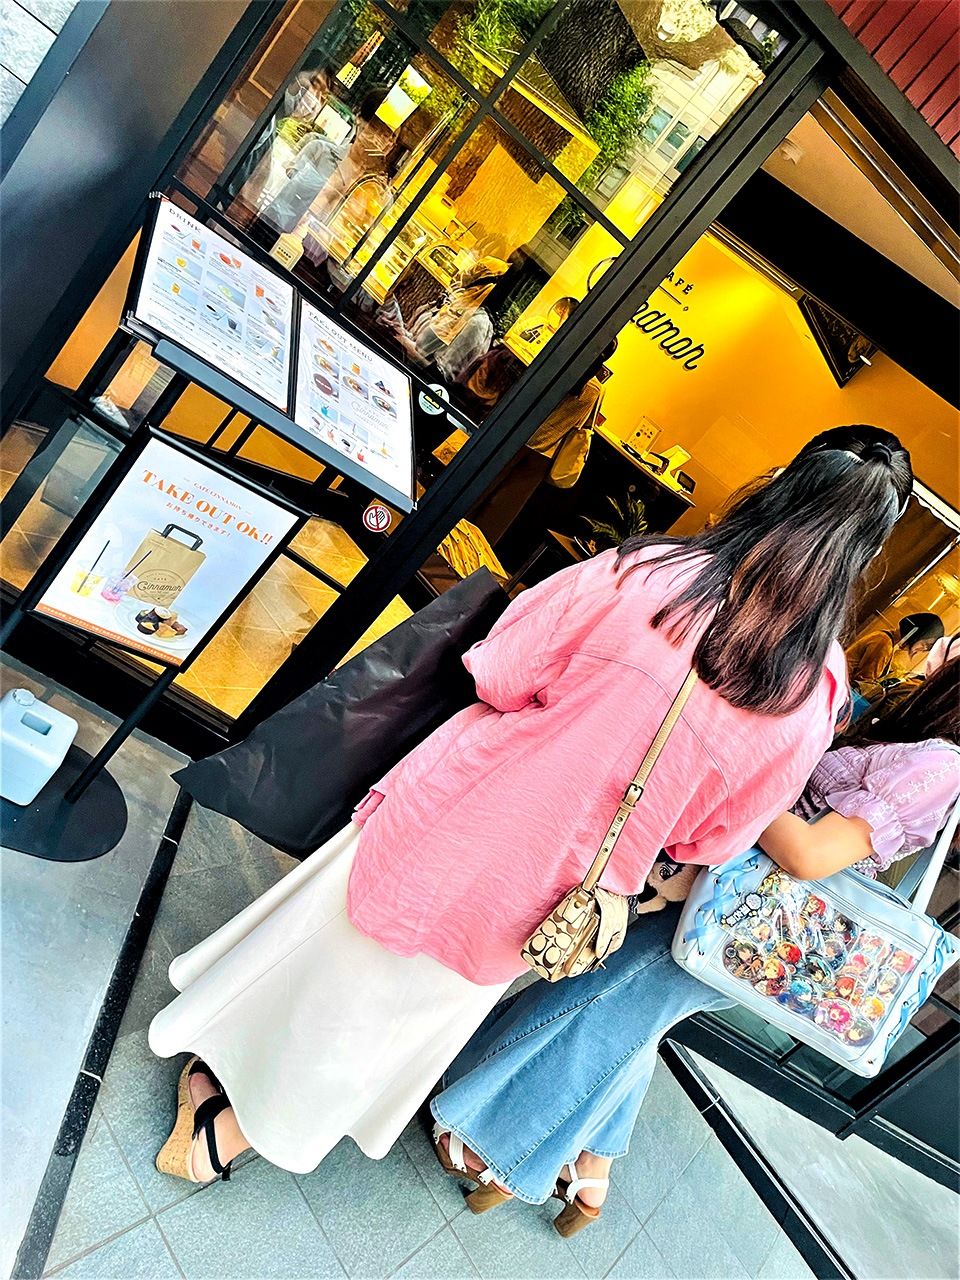 Cafe Cinnamon looks like any other fashionable café, but its clientele consists mainly of female otaku, as indicated by women sporting ita-bags at the entrance. (© Hanioka Yuri)